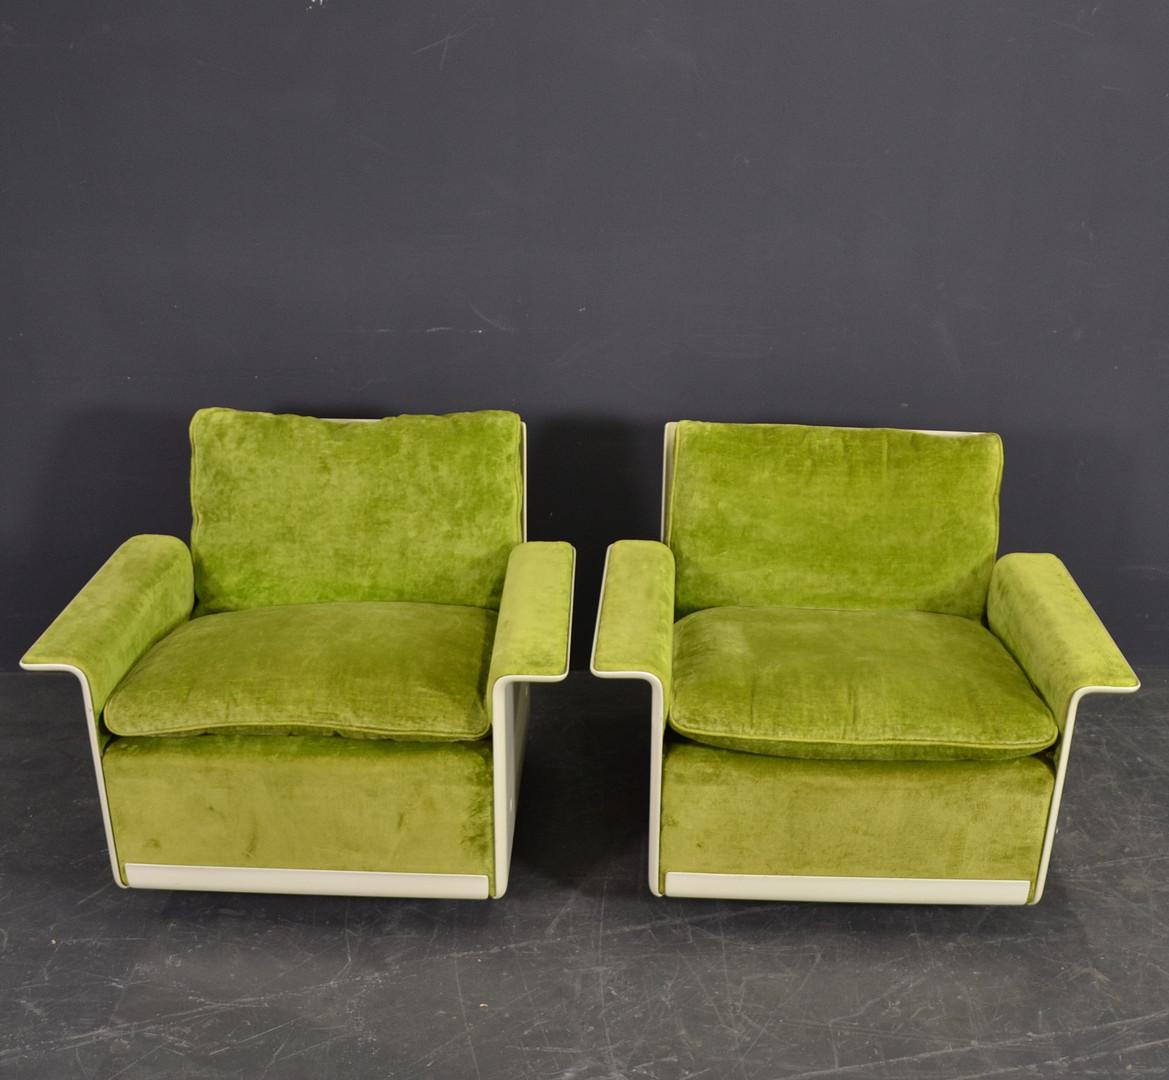 Design Dieter Rams from 1962. Produced by Vitsoe Switzerland Model 620
Modular system. Frame made of white plastic reinforced with fiberglass. Seat cushion and backrest with down upholstery, green velor cover.
Measures: Seat height approximate 40